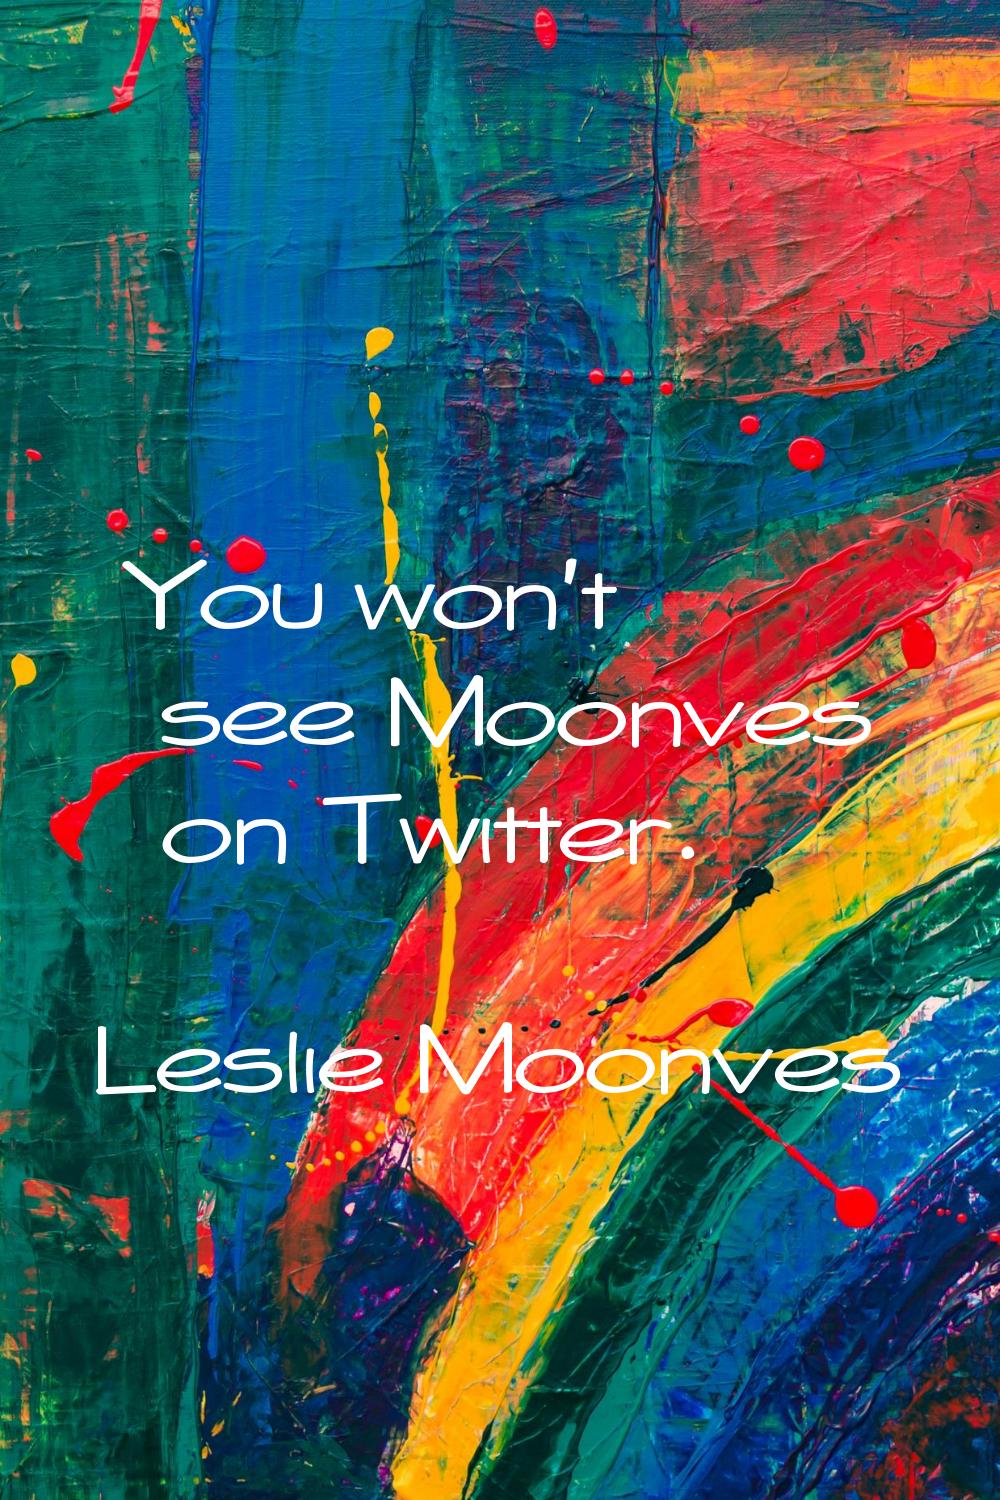 You won't see Moonves on Twitter.